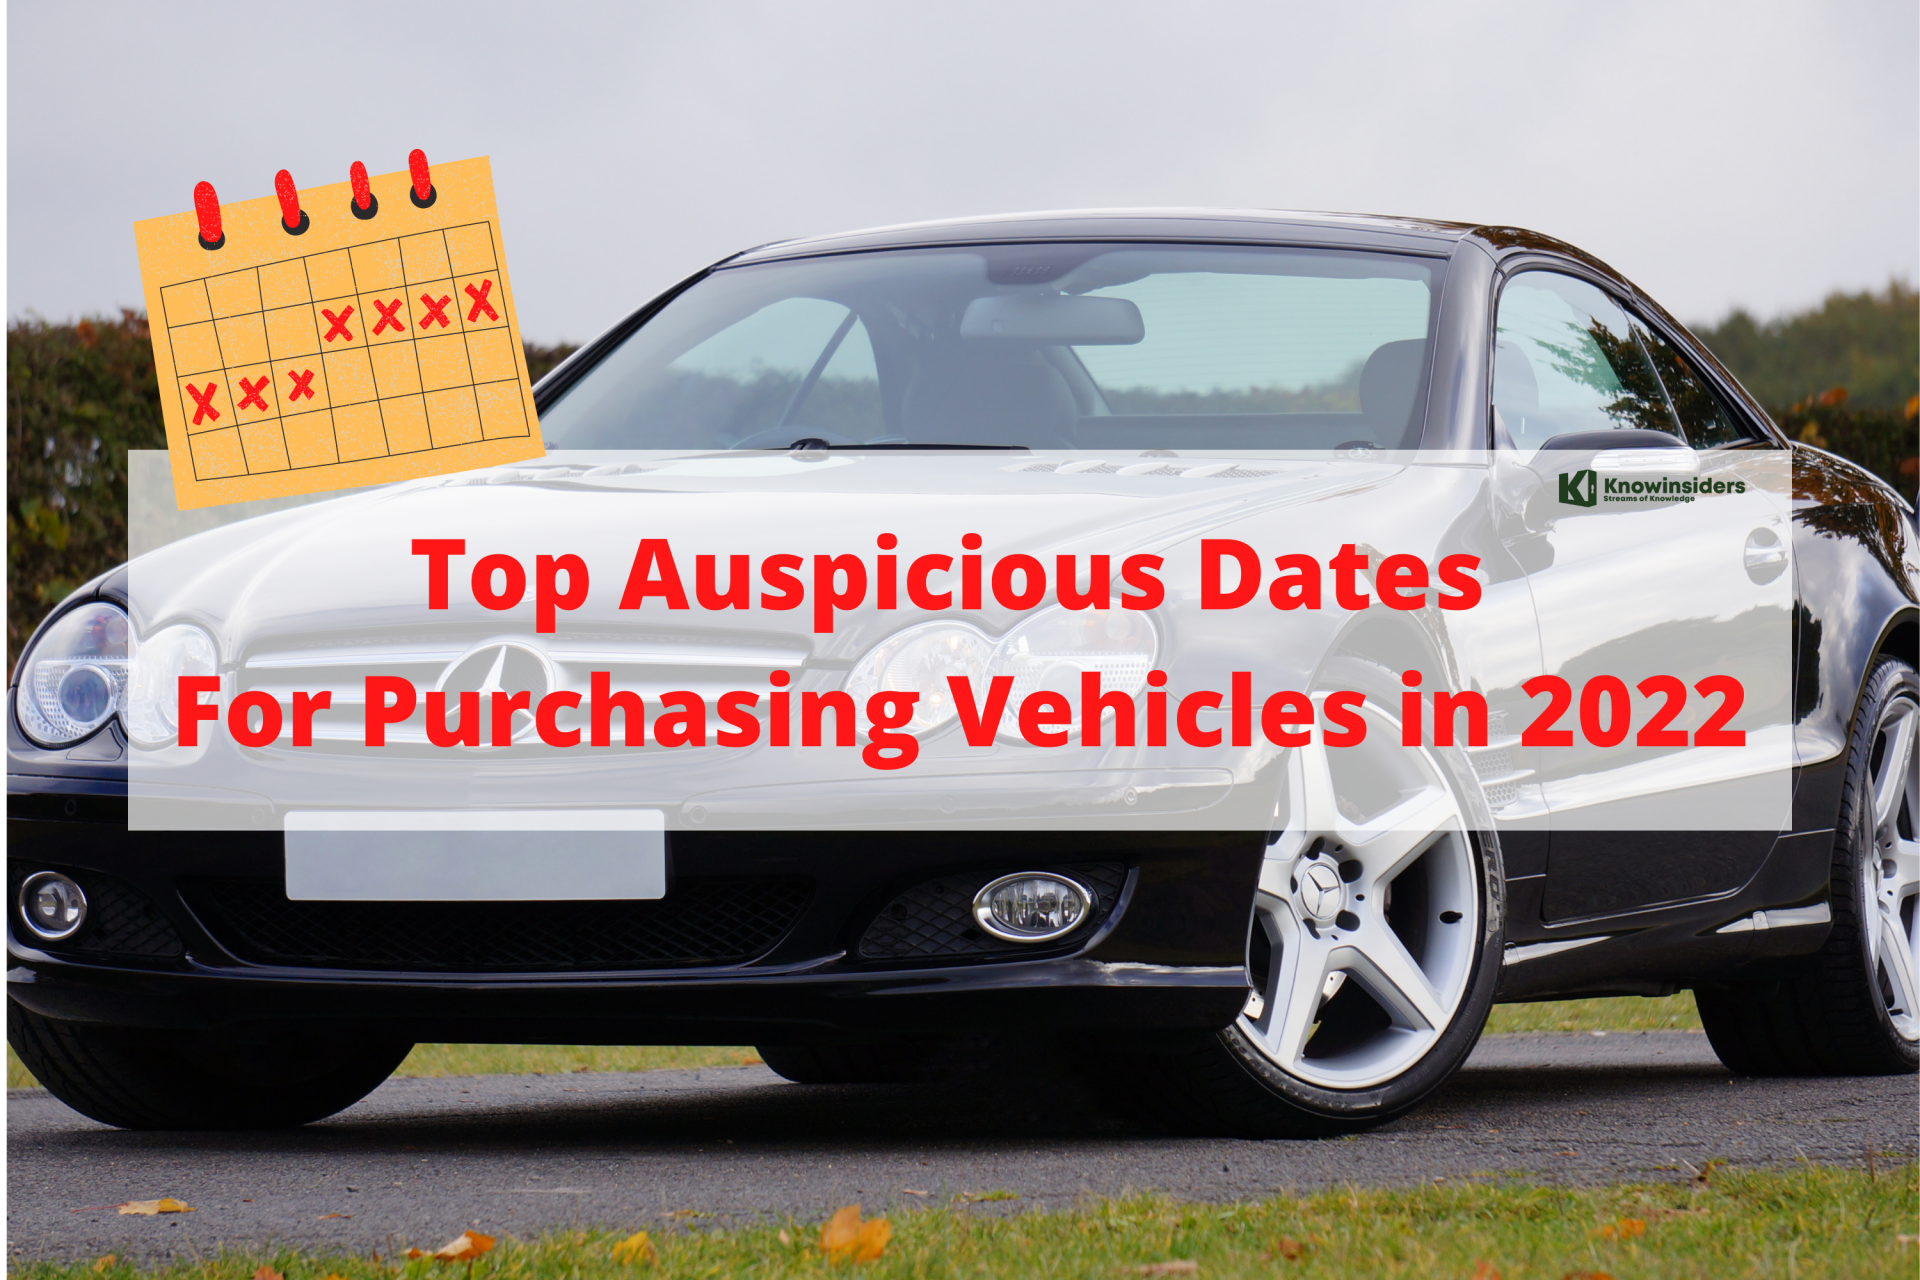 Top Auspicious Dates for Buying A Car in 2022